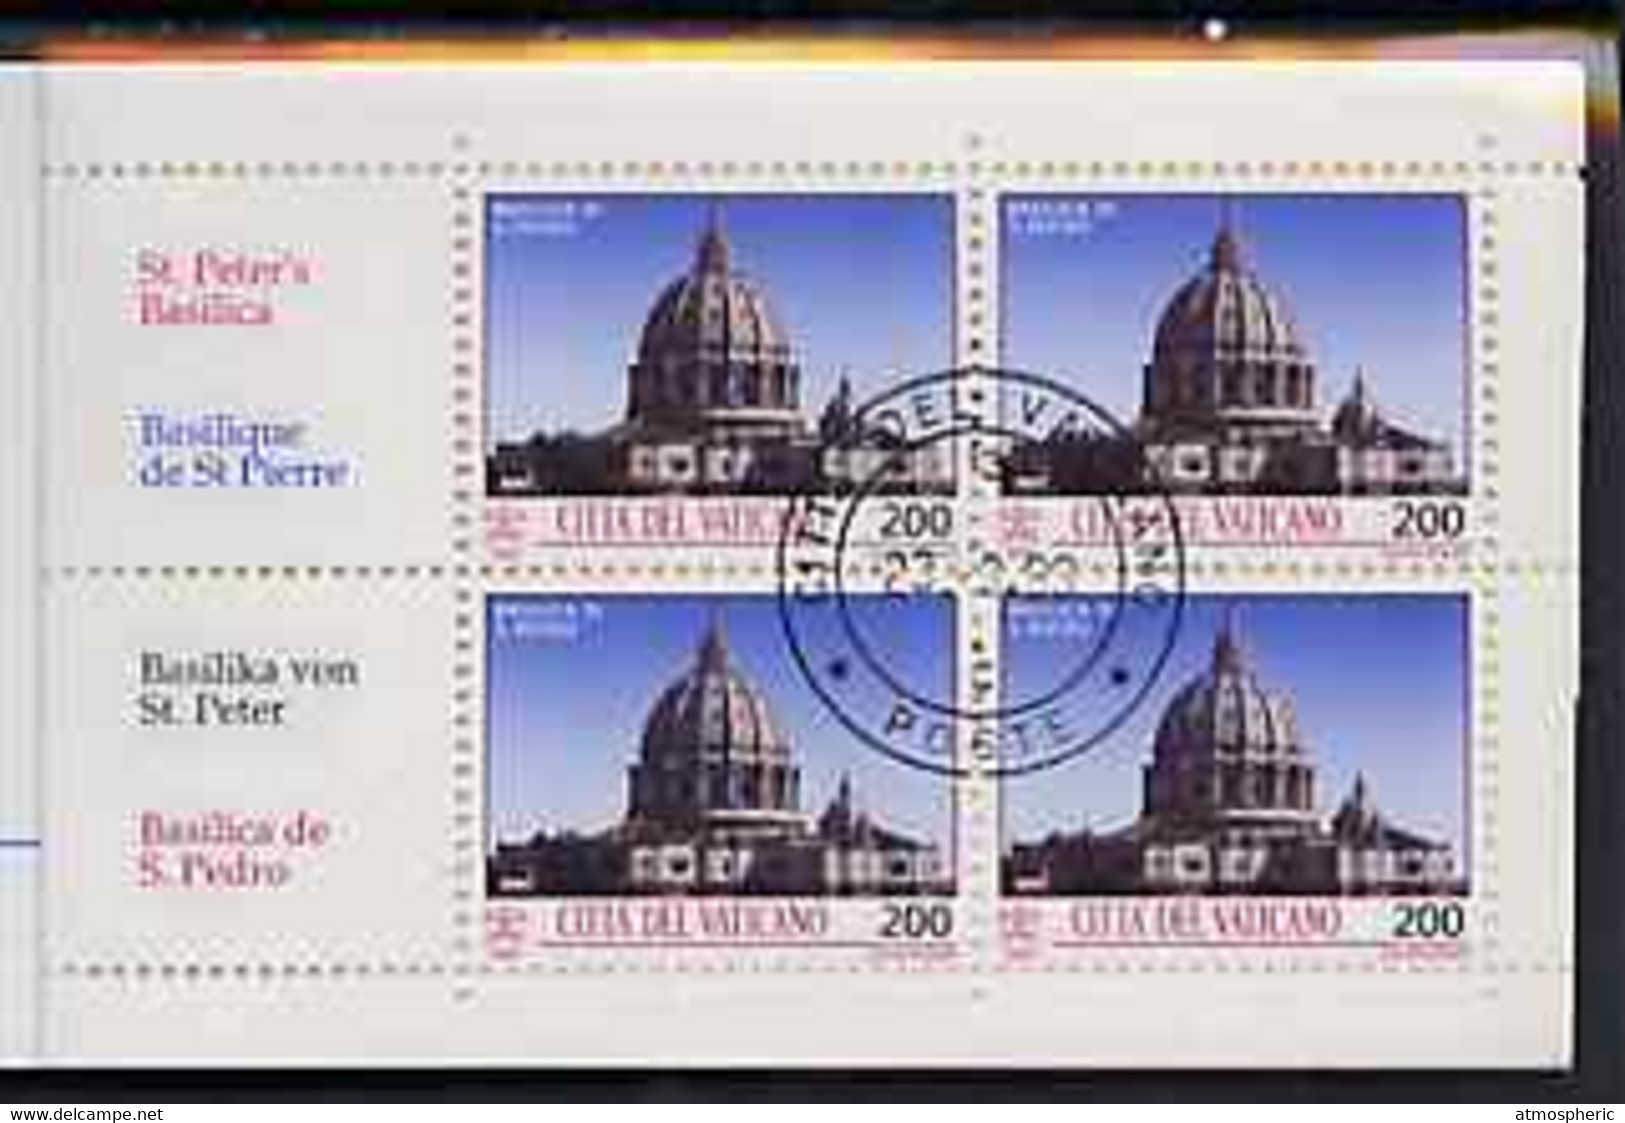 Booklet - Vatican City 1993 Architectural Treasures 5400L Booklet Complete With First Day Cancels, SG SB4 - Booklets